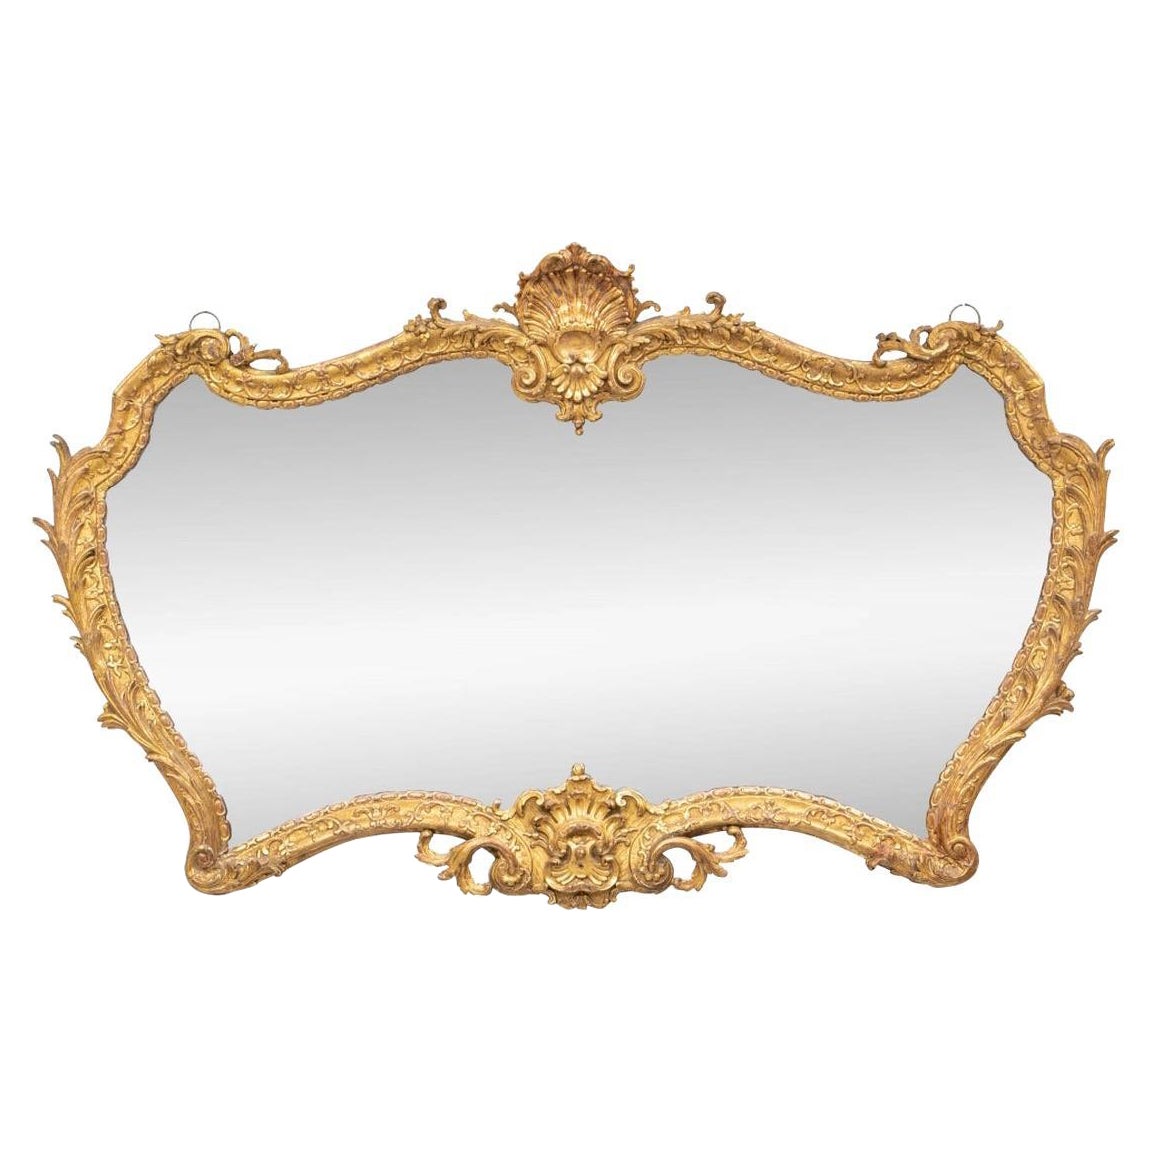 Antique Continental Carved and Gilt Cartouche Form Mirror